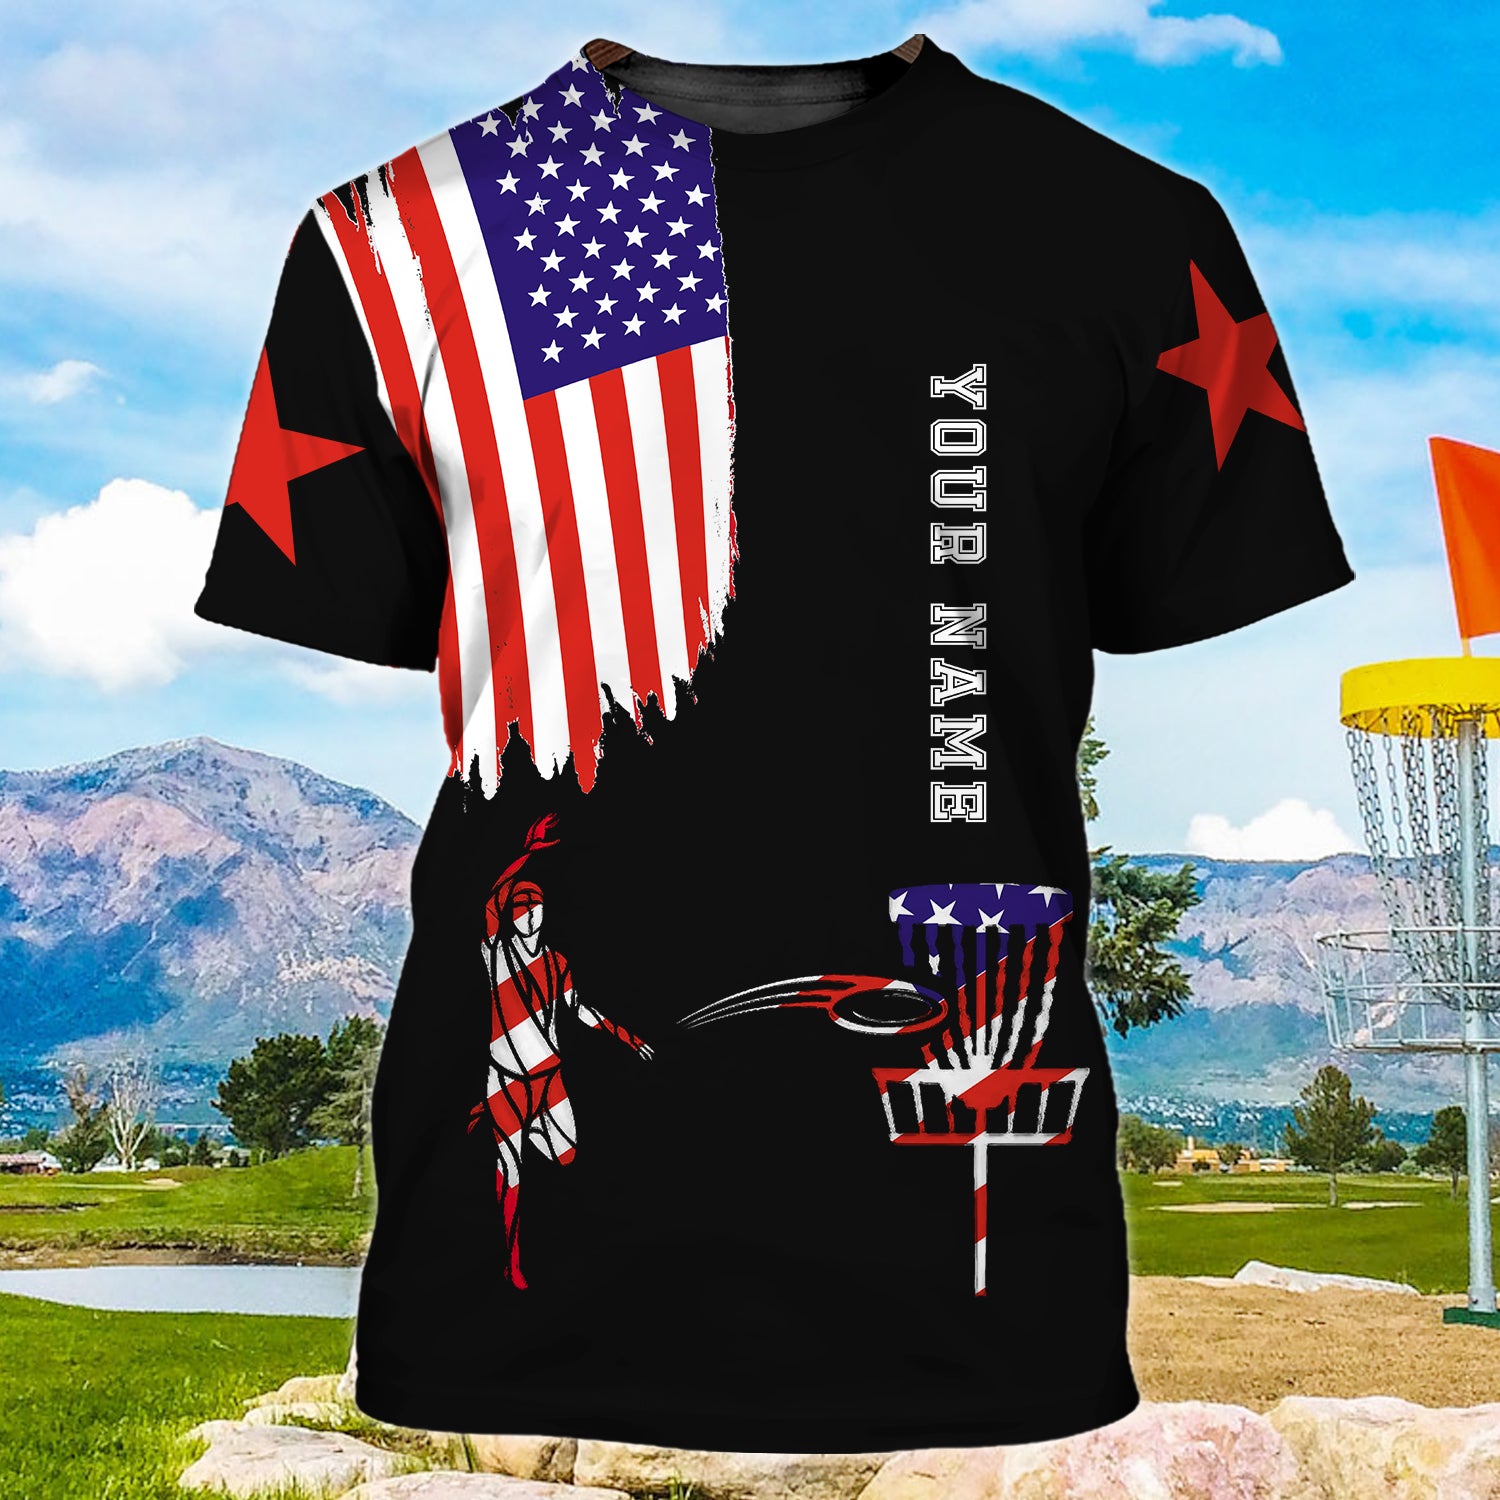 Disc Golf - Personalized Name 3D Tshirt - Nmd 52 (Only Sale Today)